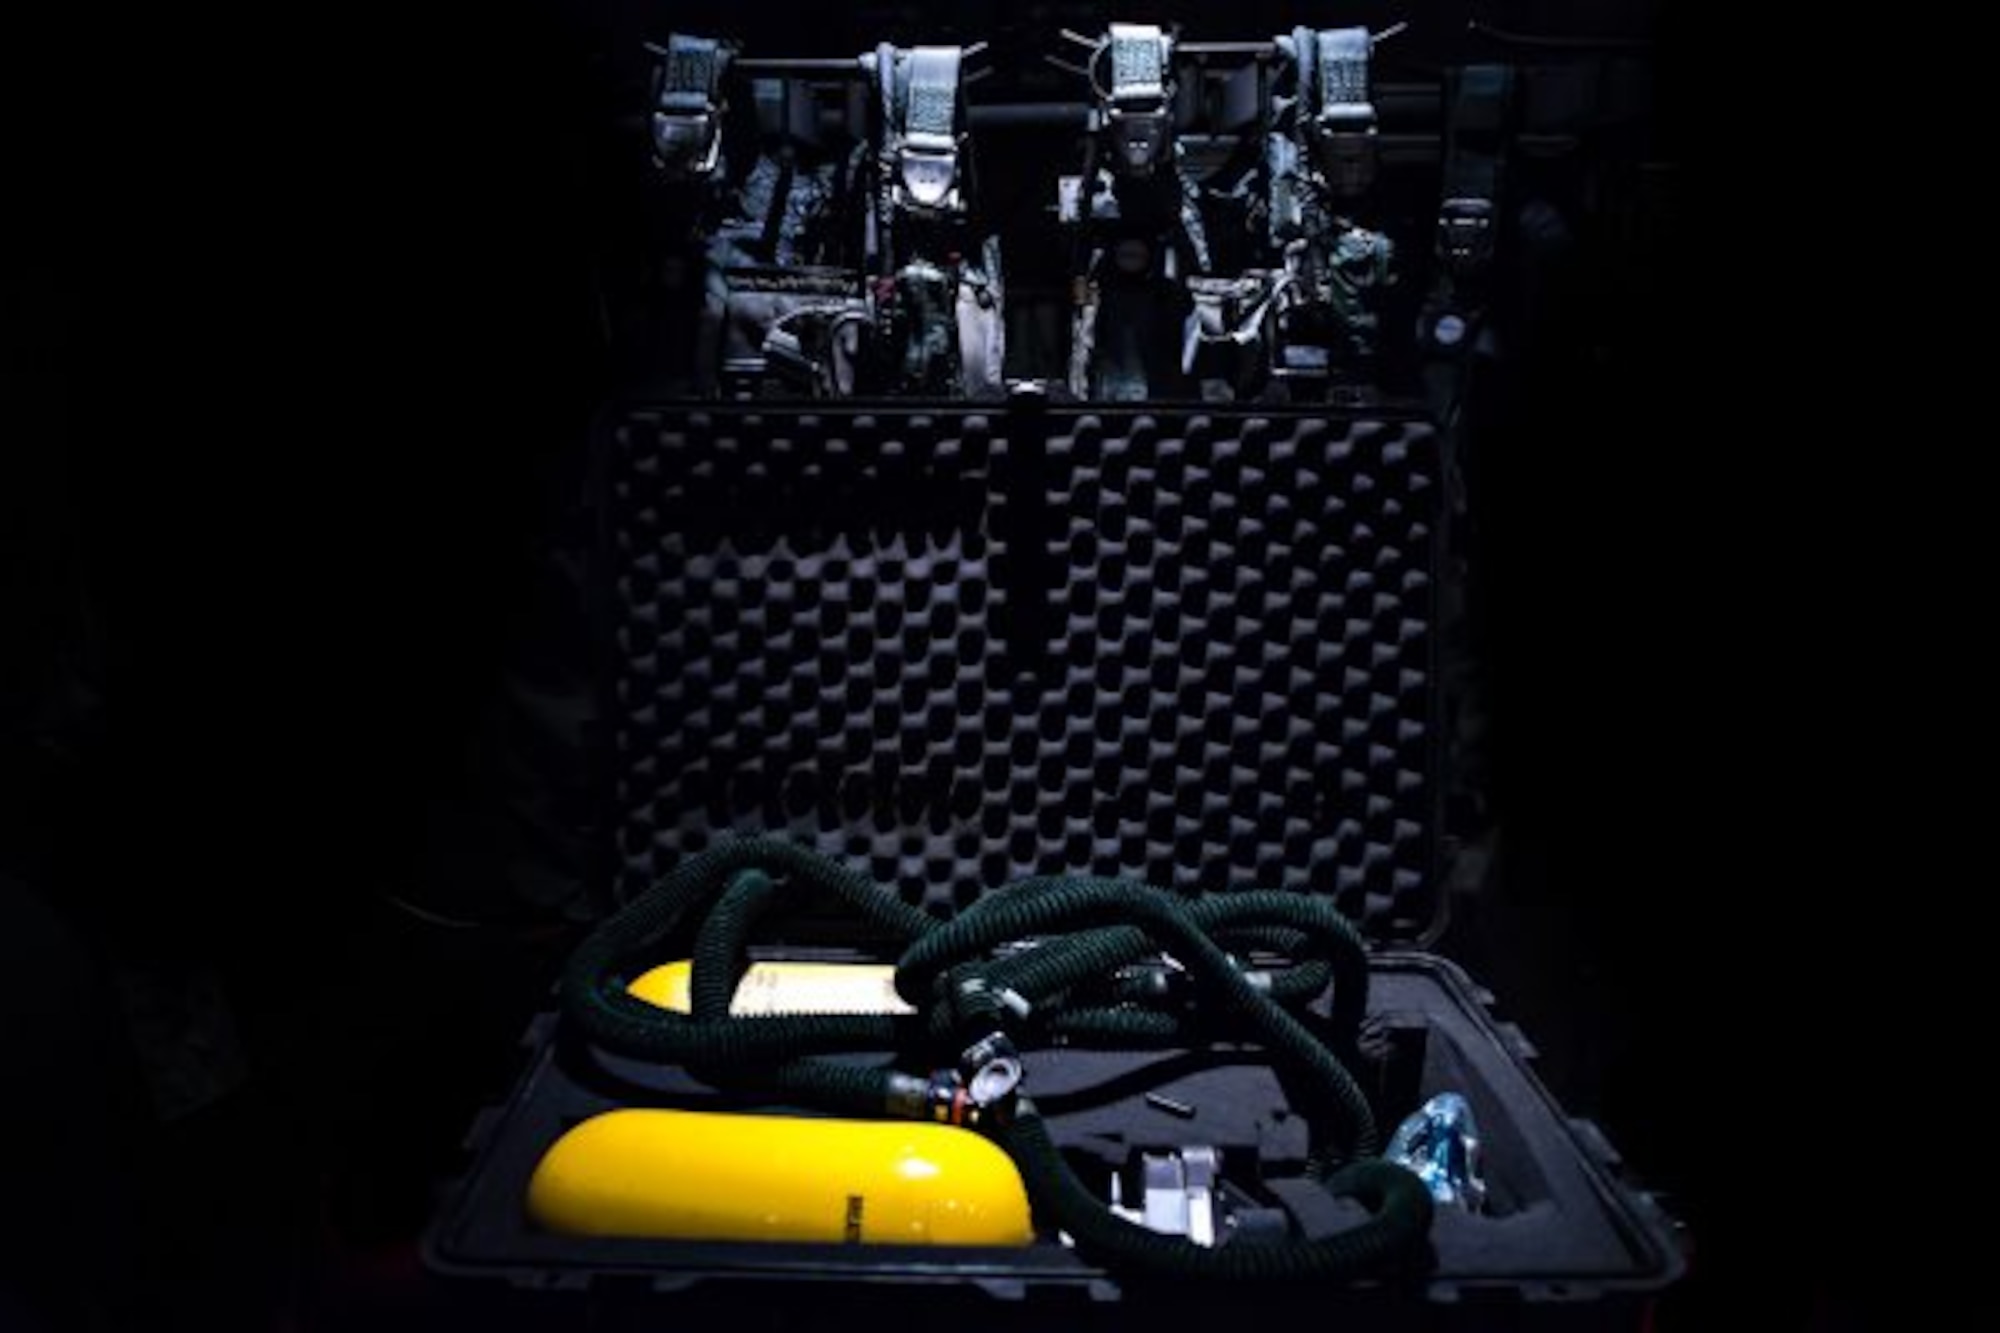 A mobile oxygen system kit sits onboard a C-130J Hercules during the preflight preparation of a high altitude training mission at Little Rock Air Force Base, Ark. on Nov. 16, 2016. The Oxygen system pictured is an integral piece of safety equipment that mitigates hypoxia. (U.S. Air Force photo/Tech. Sgt. Brandon Shapiro)